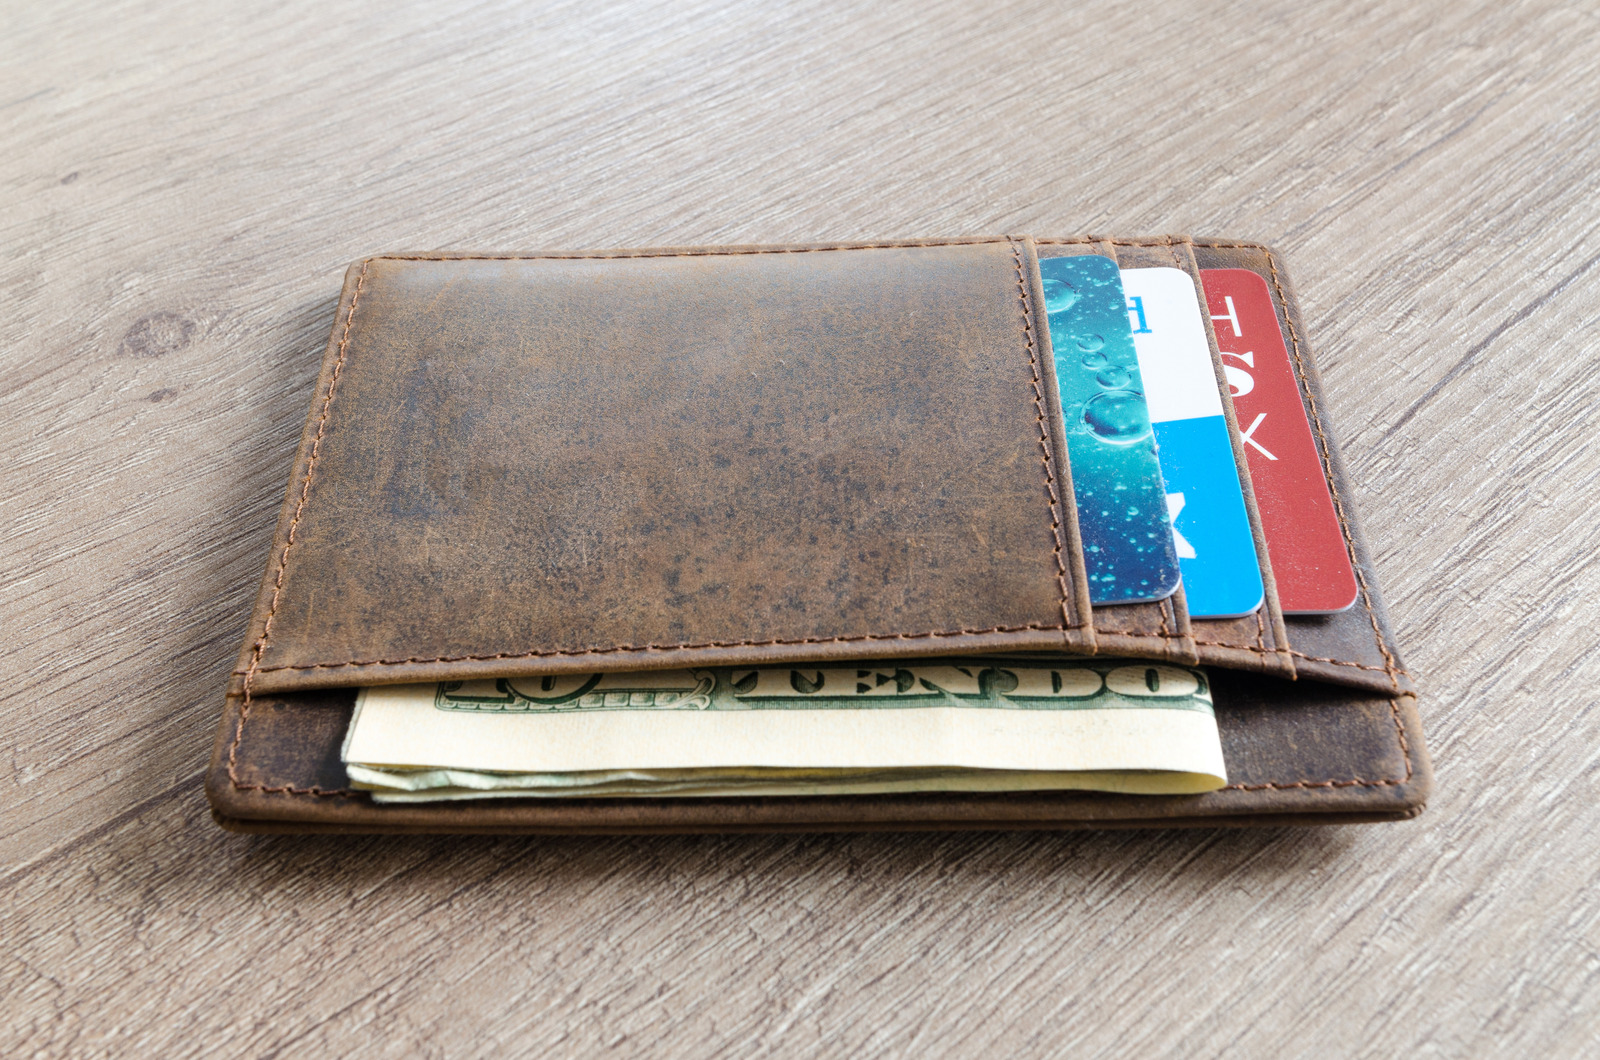 Leather wallet with cards and money inside sitting on a wooden table